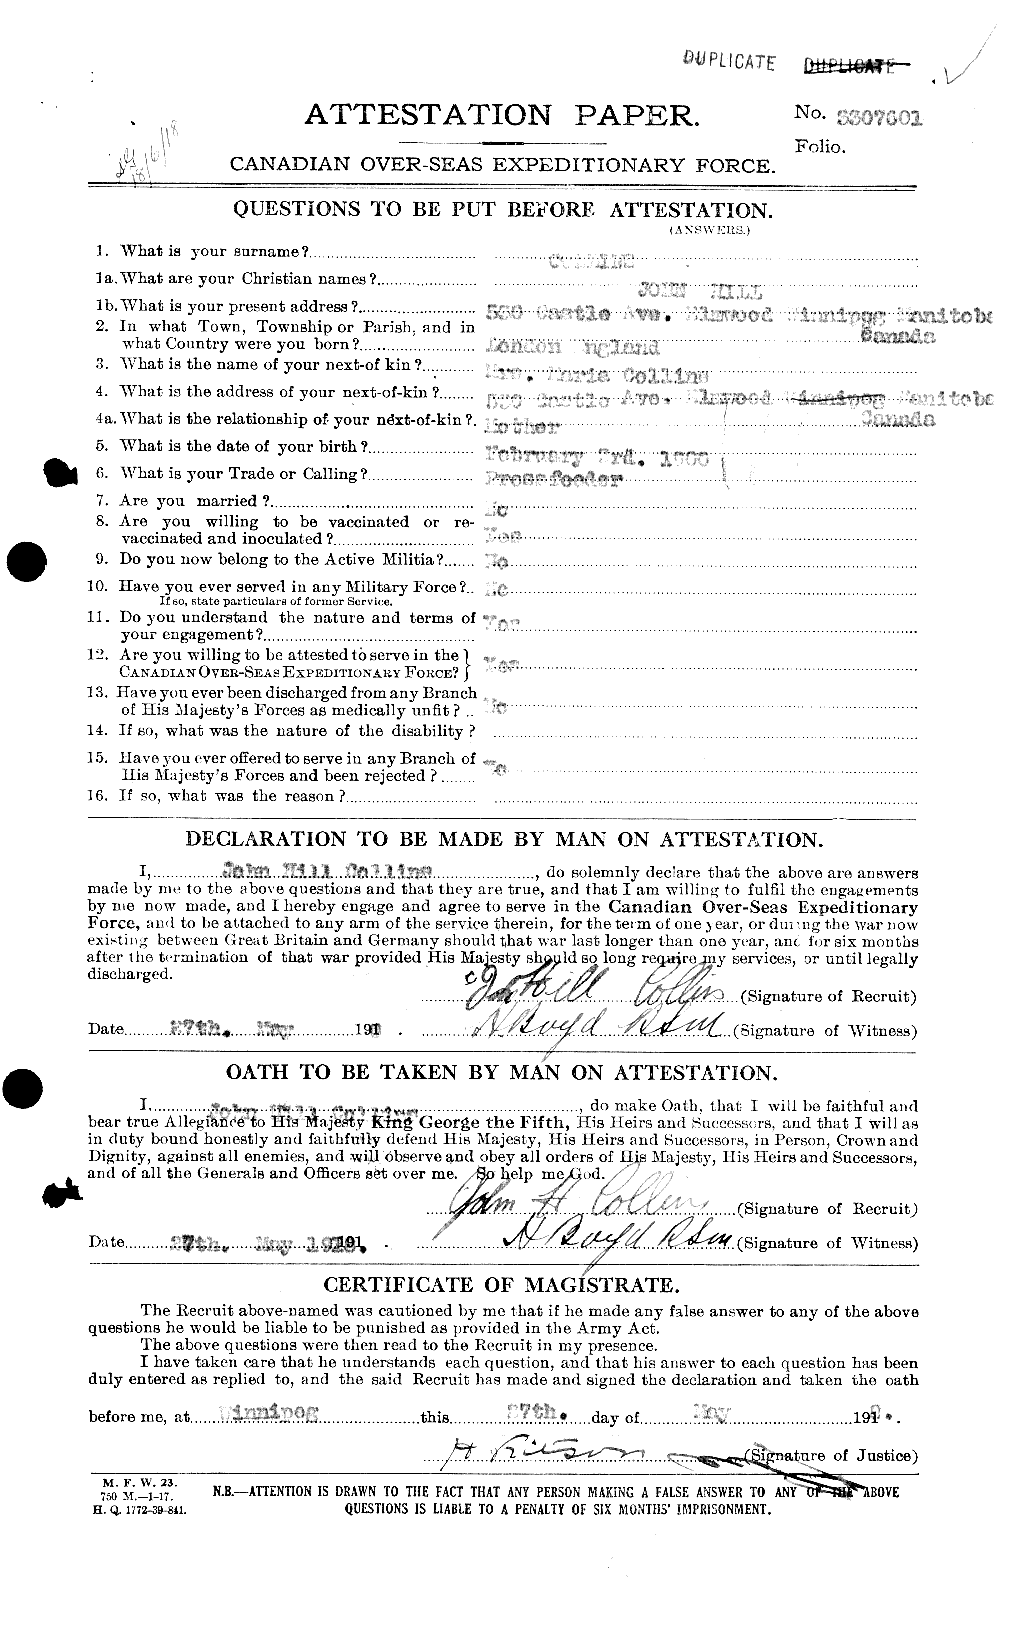 Personnel Records of the First World War - CEF 034358a